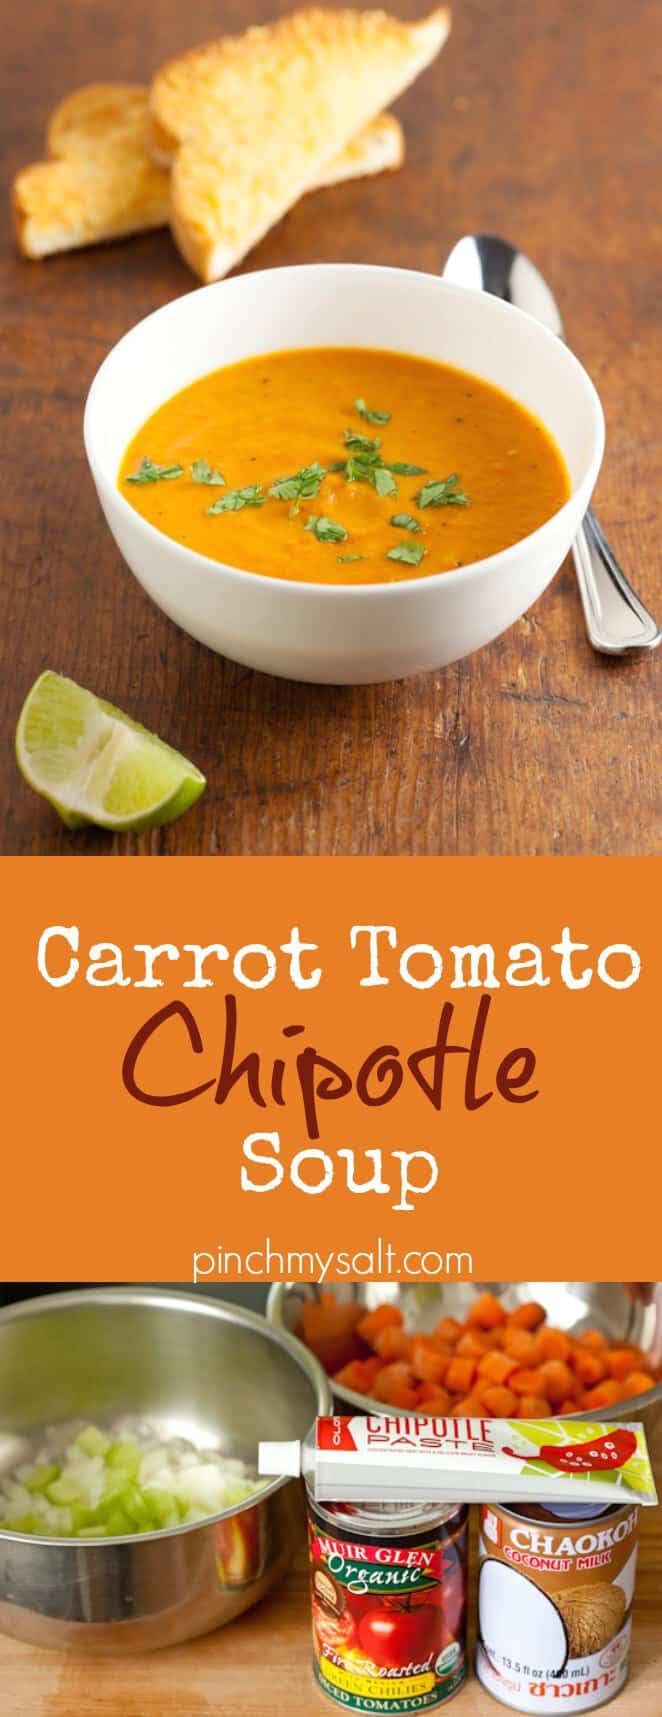 Carrot Tomato Soup with Chipotle | pinchmysalt.com